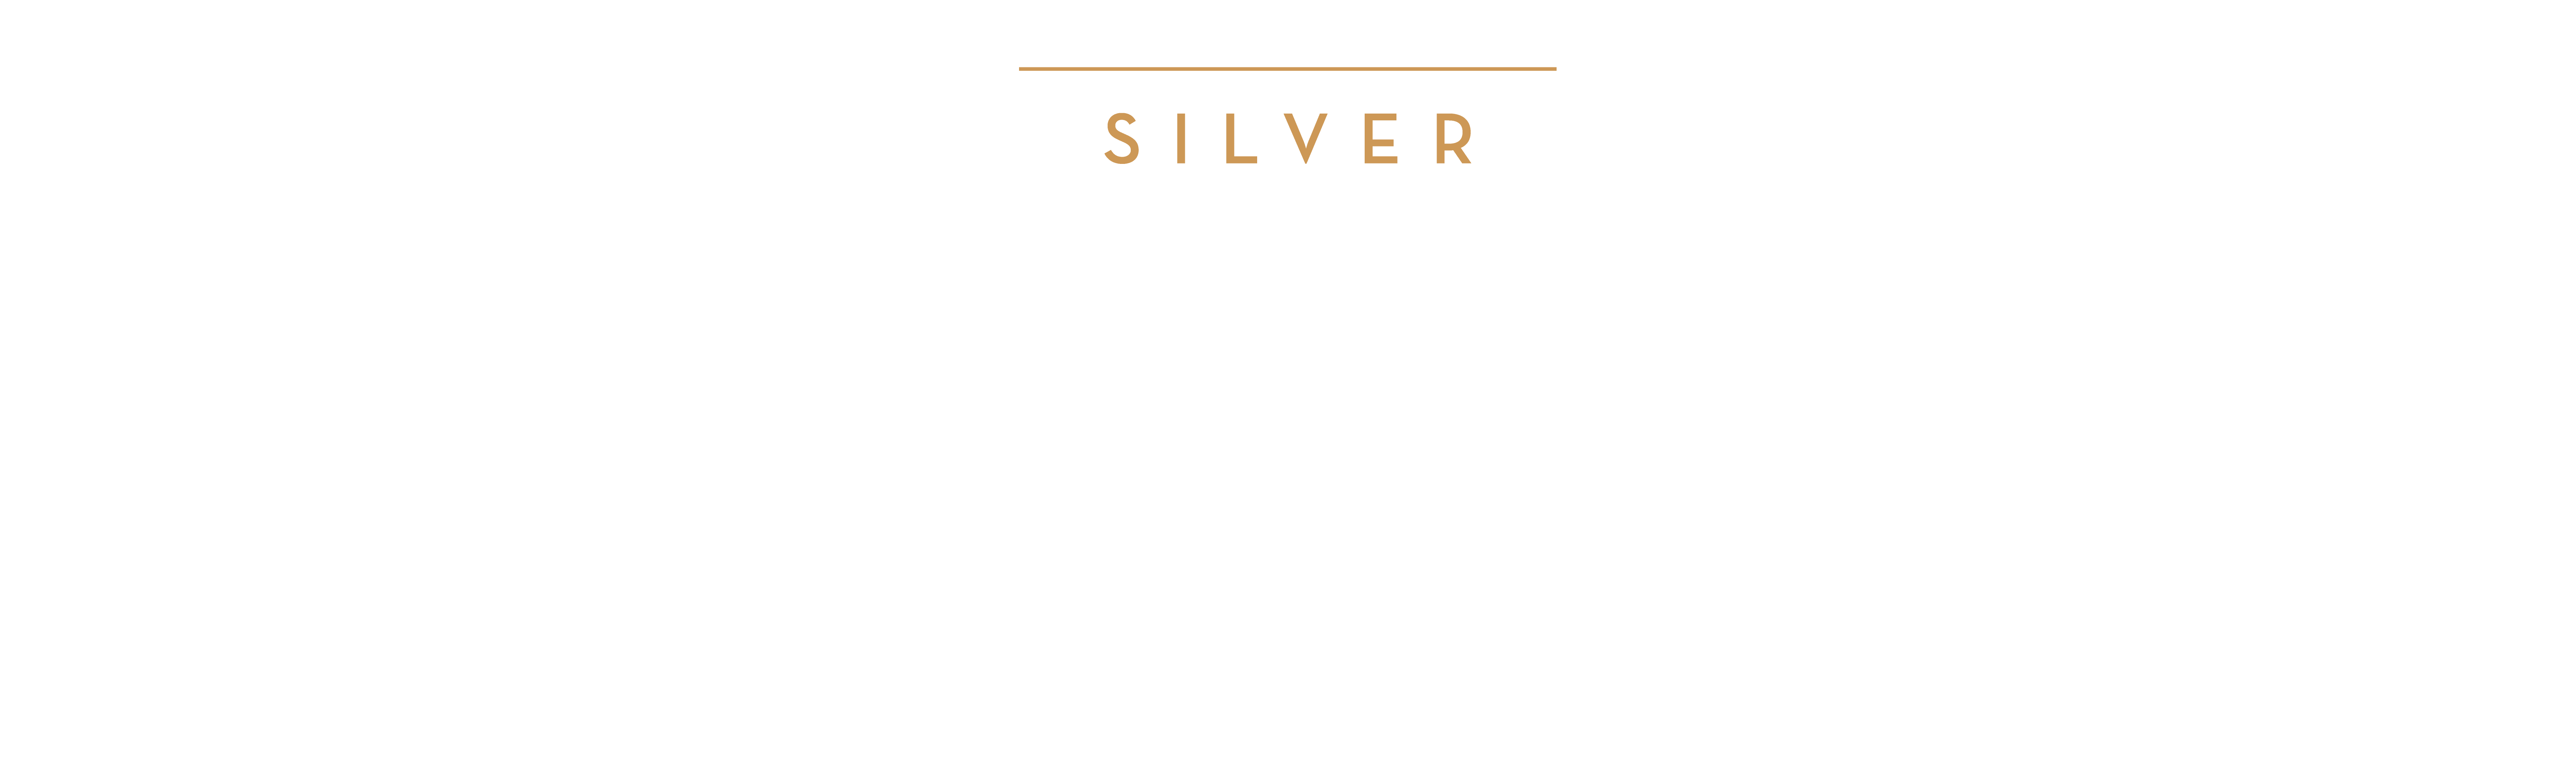 Silver: AAR CORP. I ACCENTURE | ACCESS COMMUNITY HEALTH NETWORK | CHAPMAN AND CUTLER LLP I CIBC
DECASONIC I EY I FCB CHICAGO | JOSEPH ORLANDO, FINANCIAL RENAISSANCE | HUNTINGTON BANK
INGREDION | KIRKLAND & ELLIS LP | KPMG LLP | MAYER BROWN LLP | META CHICAGO | MICHELLE L COLLINS
MICROSOFT | NASCAR NIELSENIQ PEOPLES GAS| RELATED MIDWEST RIVERSIDE INVESTMENT AND DEVELOPMENT
ROSY AND JOSE LUIS PRADO | SPAN TECH, INC. | STANTEC AND SDI PRESENCE LLC | TORO CONSTRUCTION CORP.